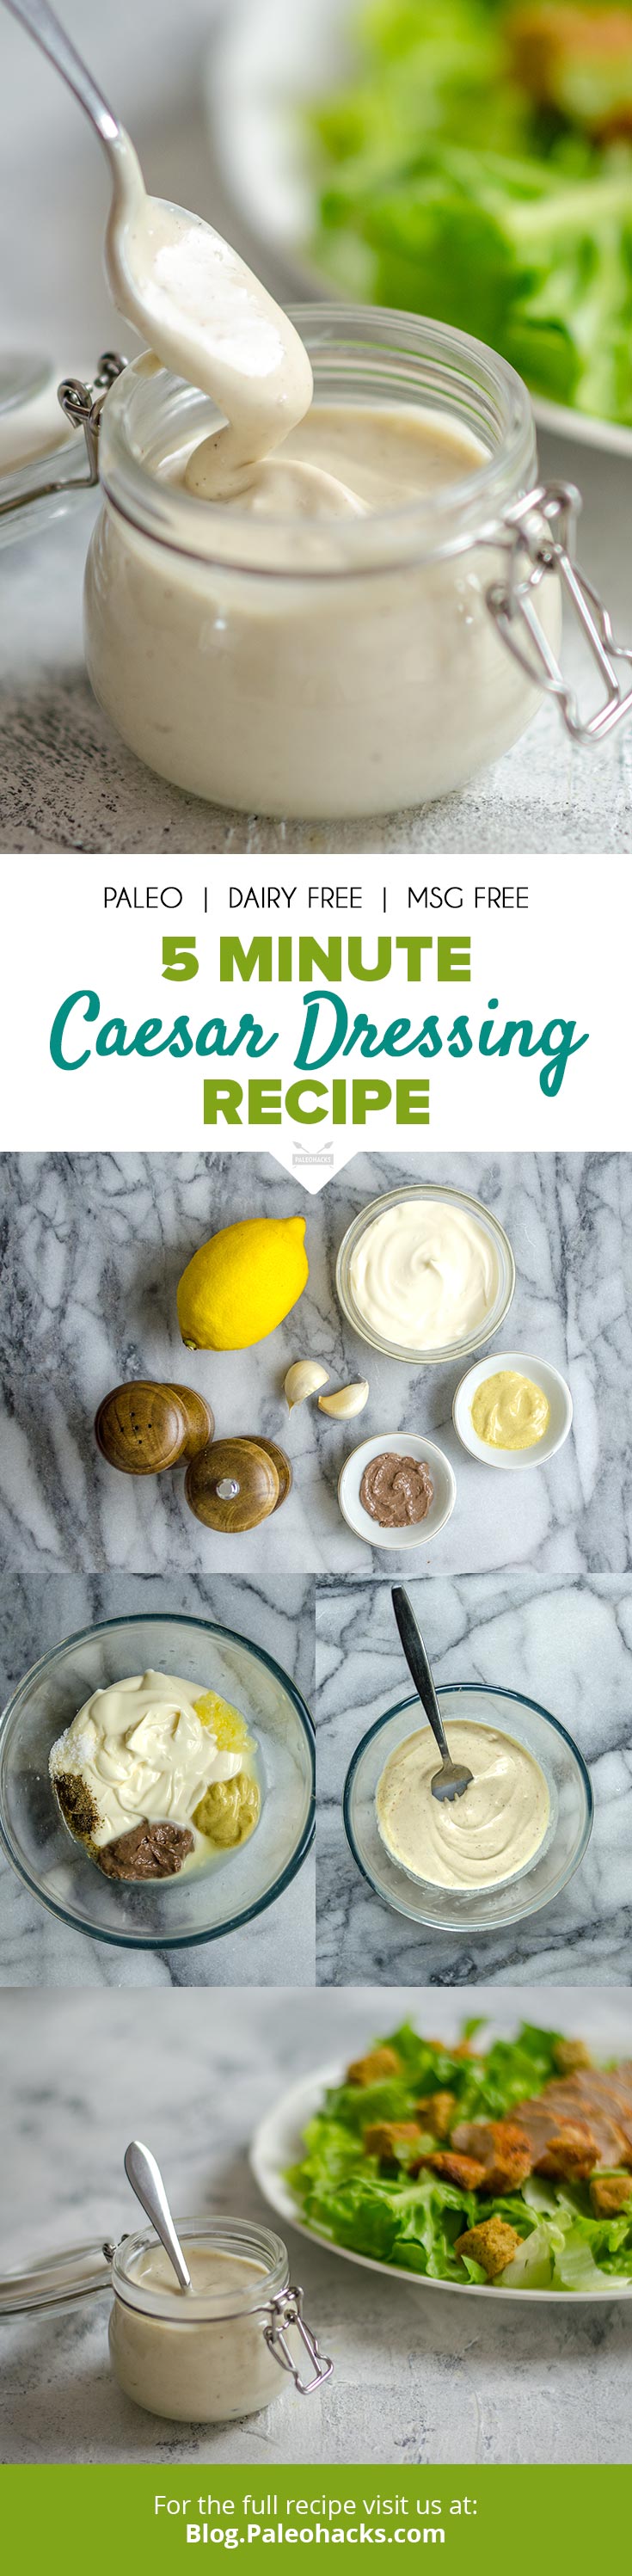 Drizzle this creamy Caesar dressing over your favorite salad. The best part about it? It only takes 5 minutes to whisk together!